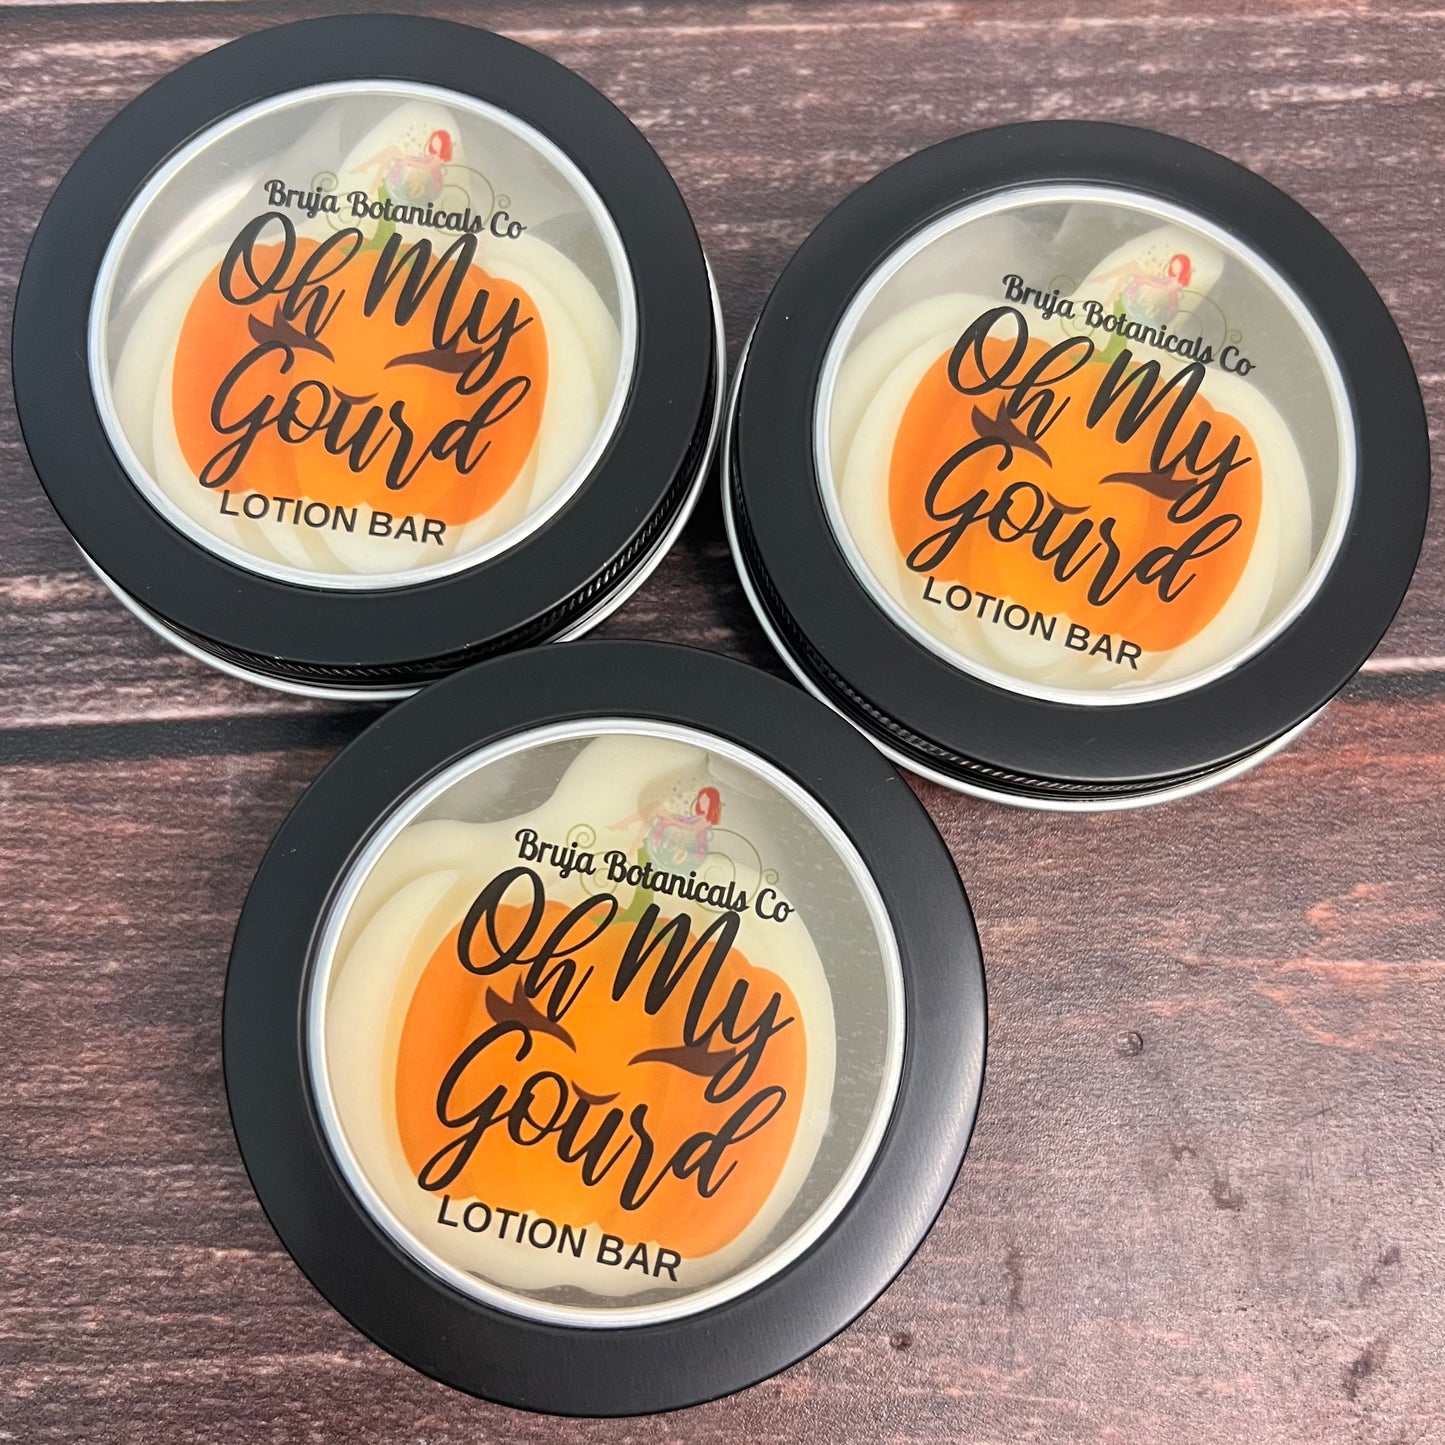 Oh My Gourd Lotion Bar